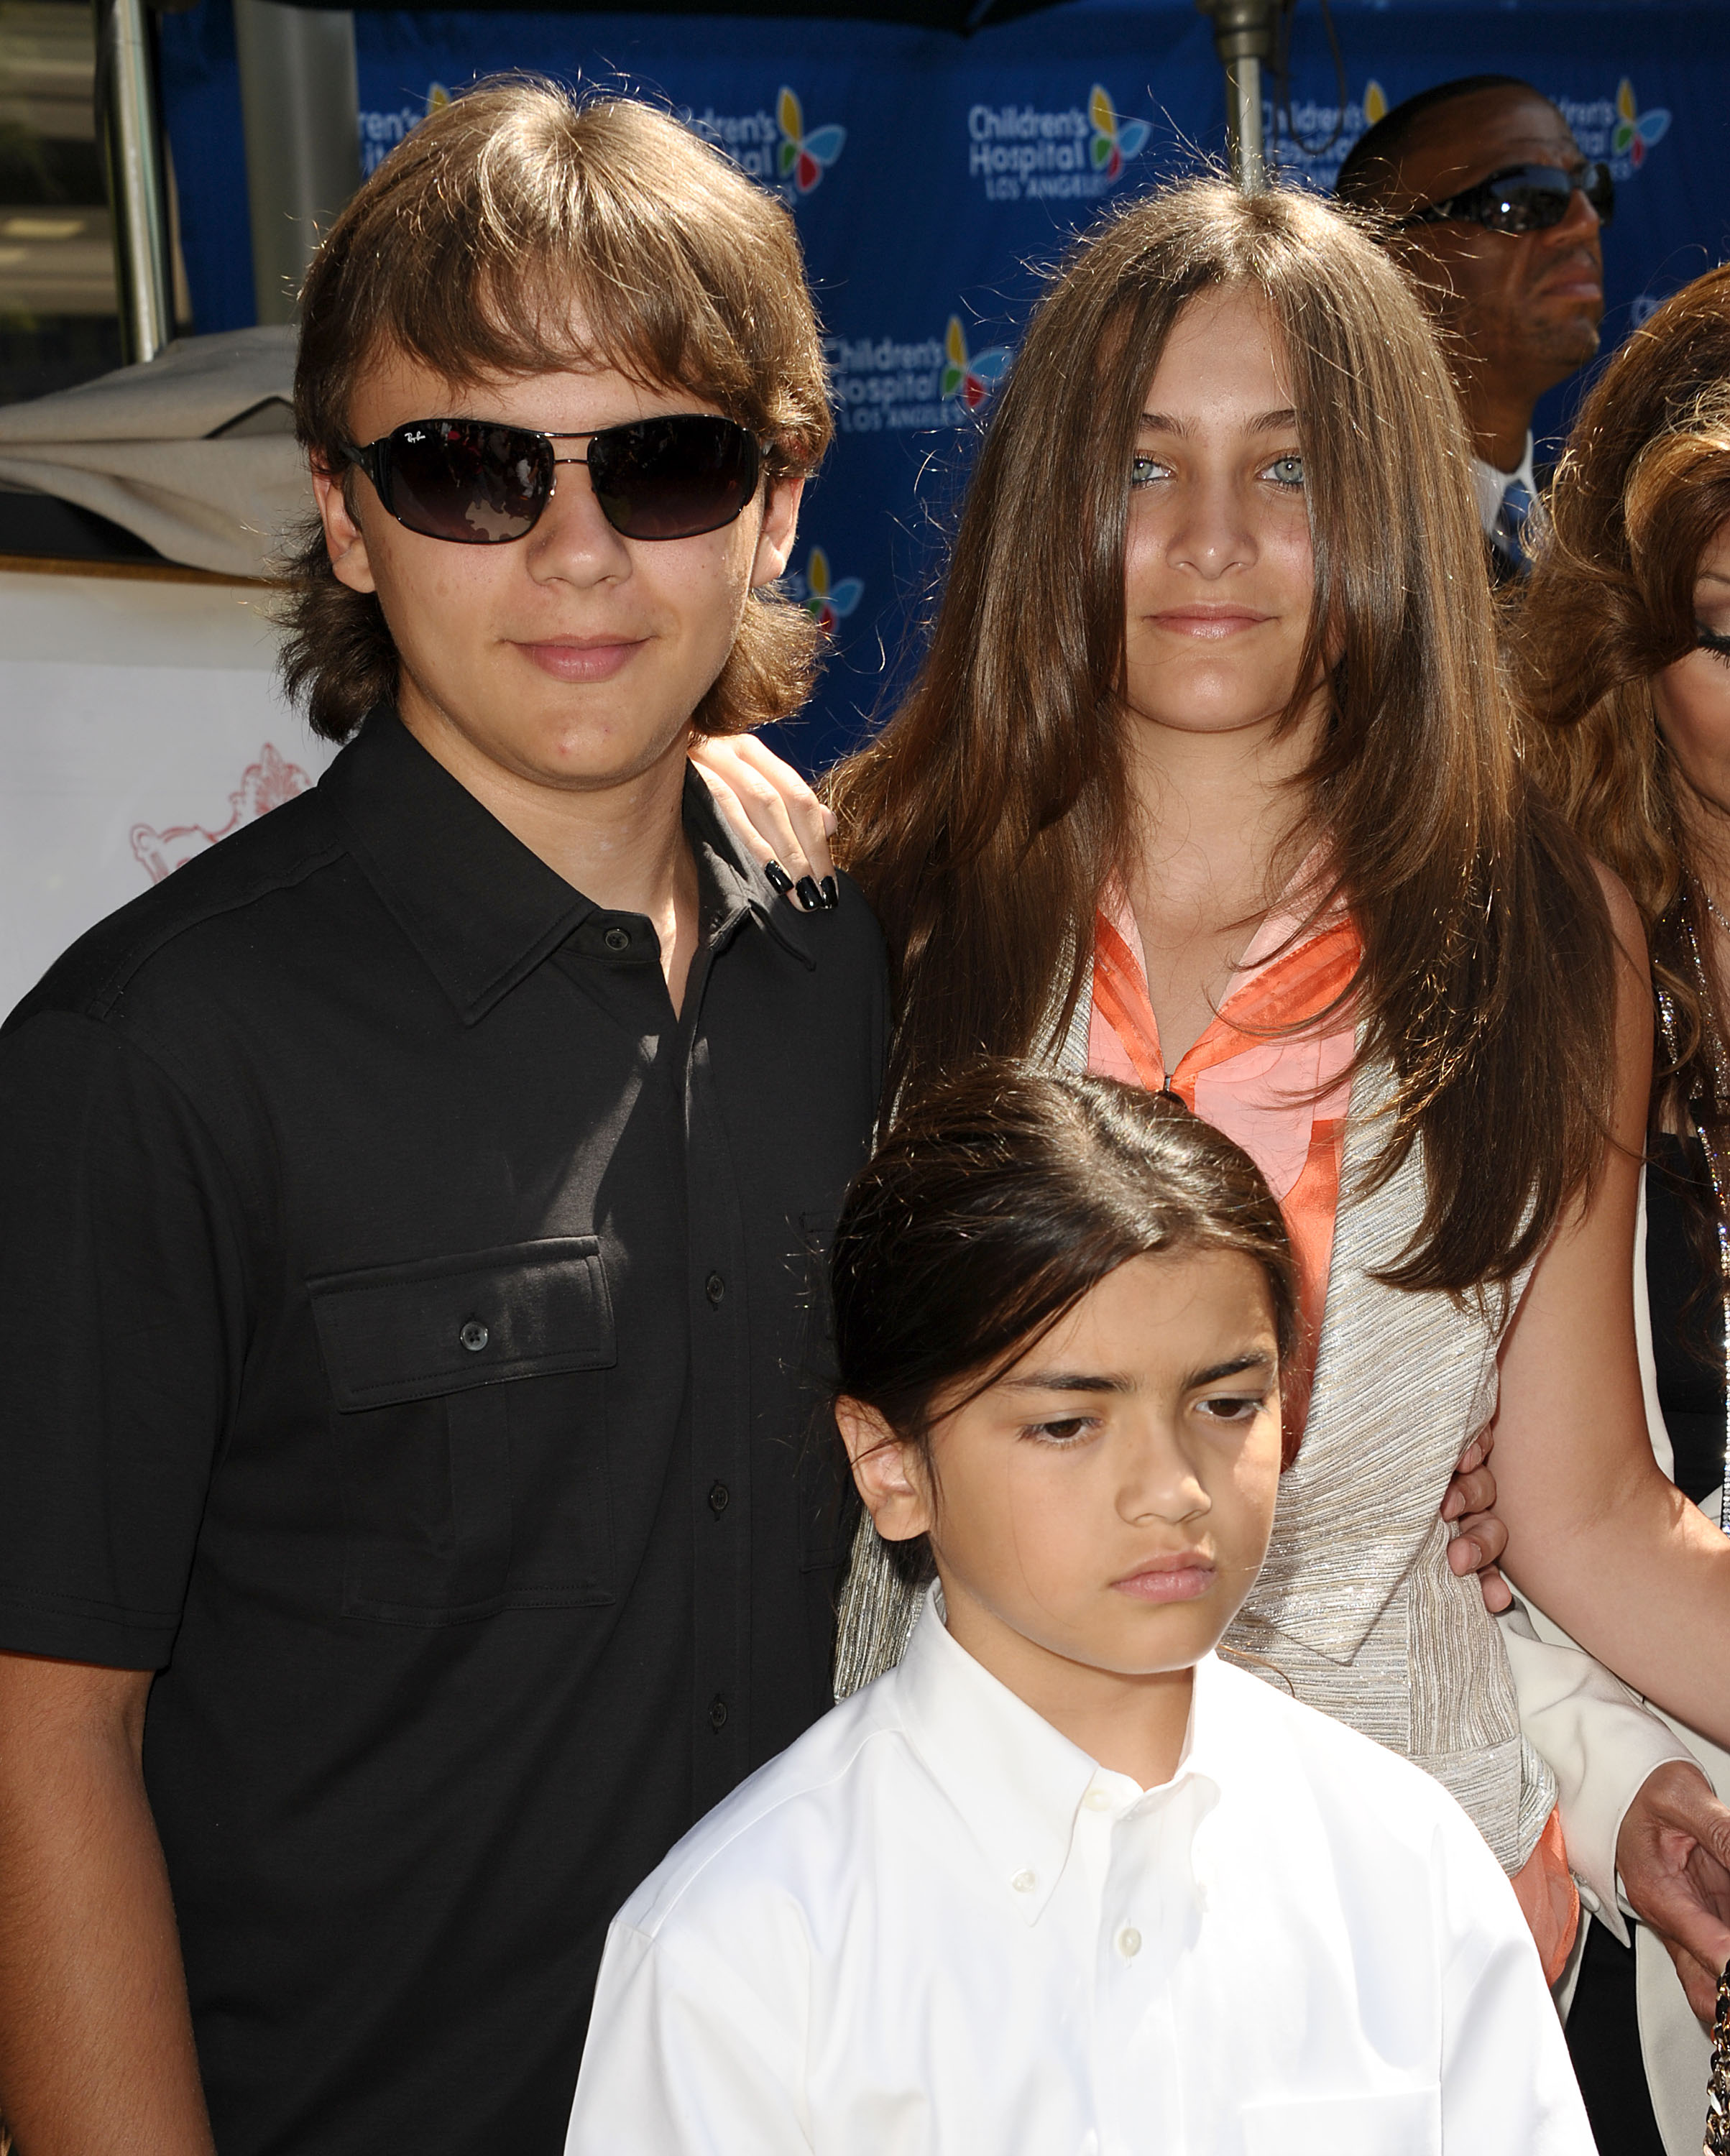 Prince, Bigi and Paris Jackson at the Jackson Family donation event at Children's Hospital Los Angeles in Los Angeles, California on August 8, 2011 | Source: Getty Images